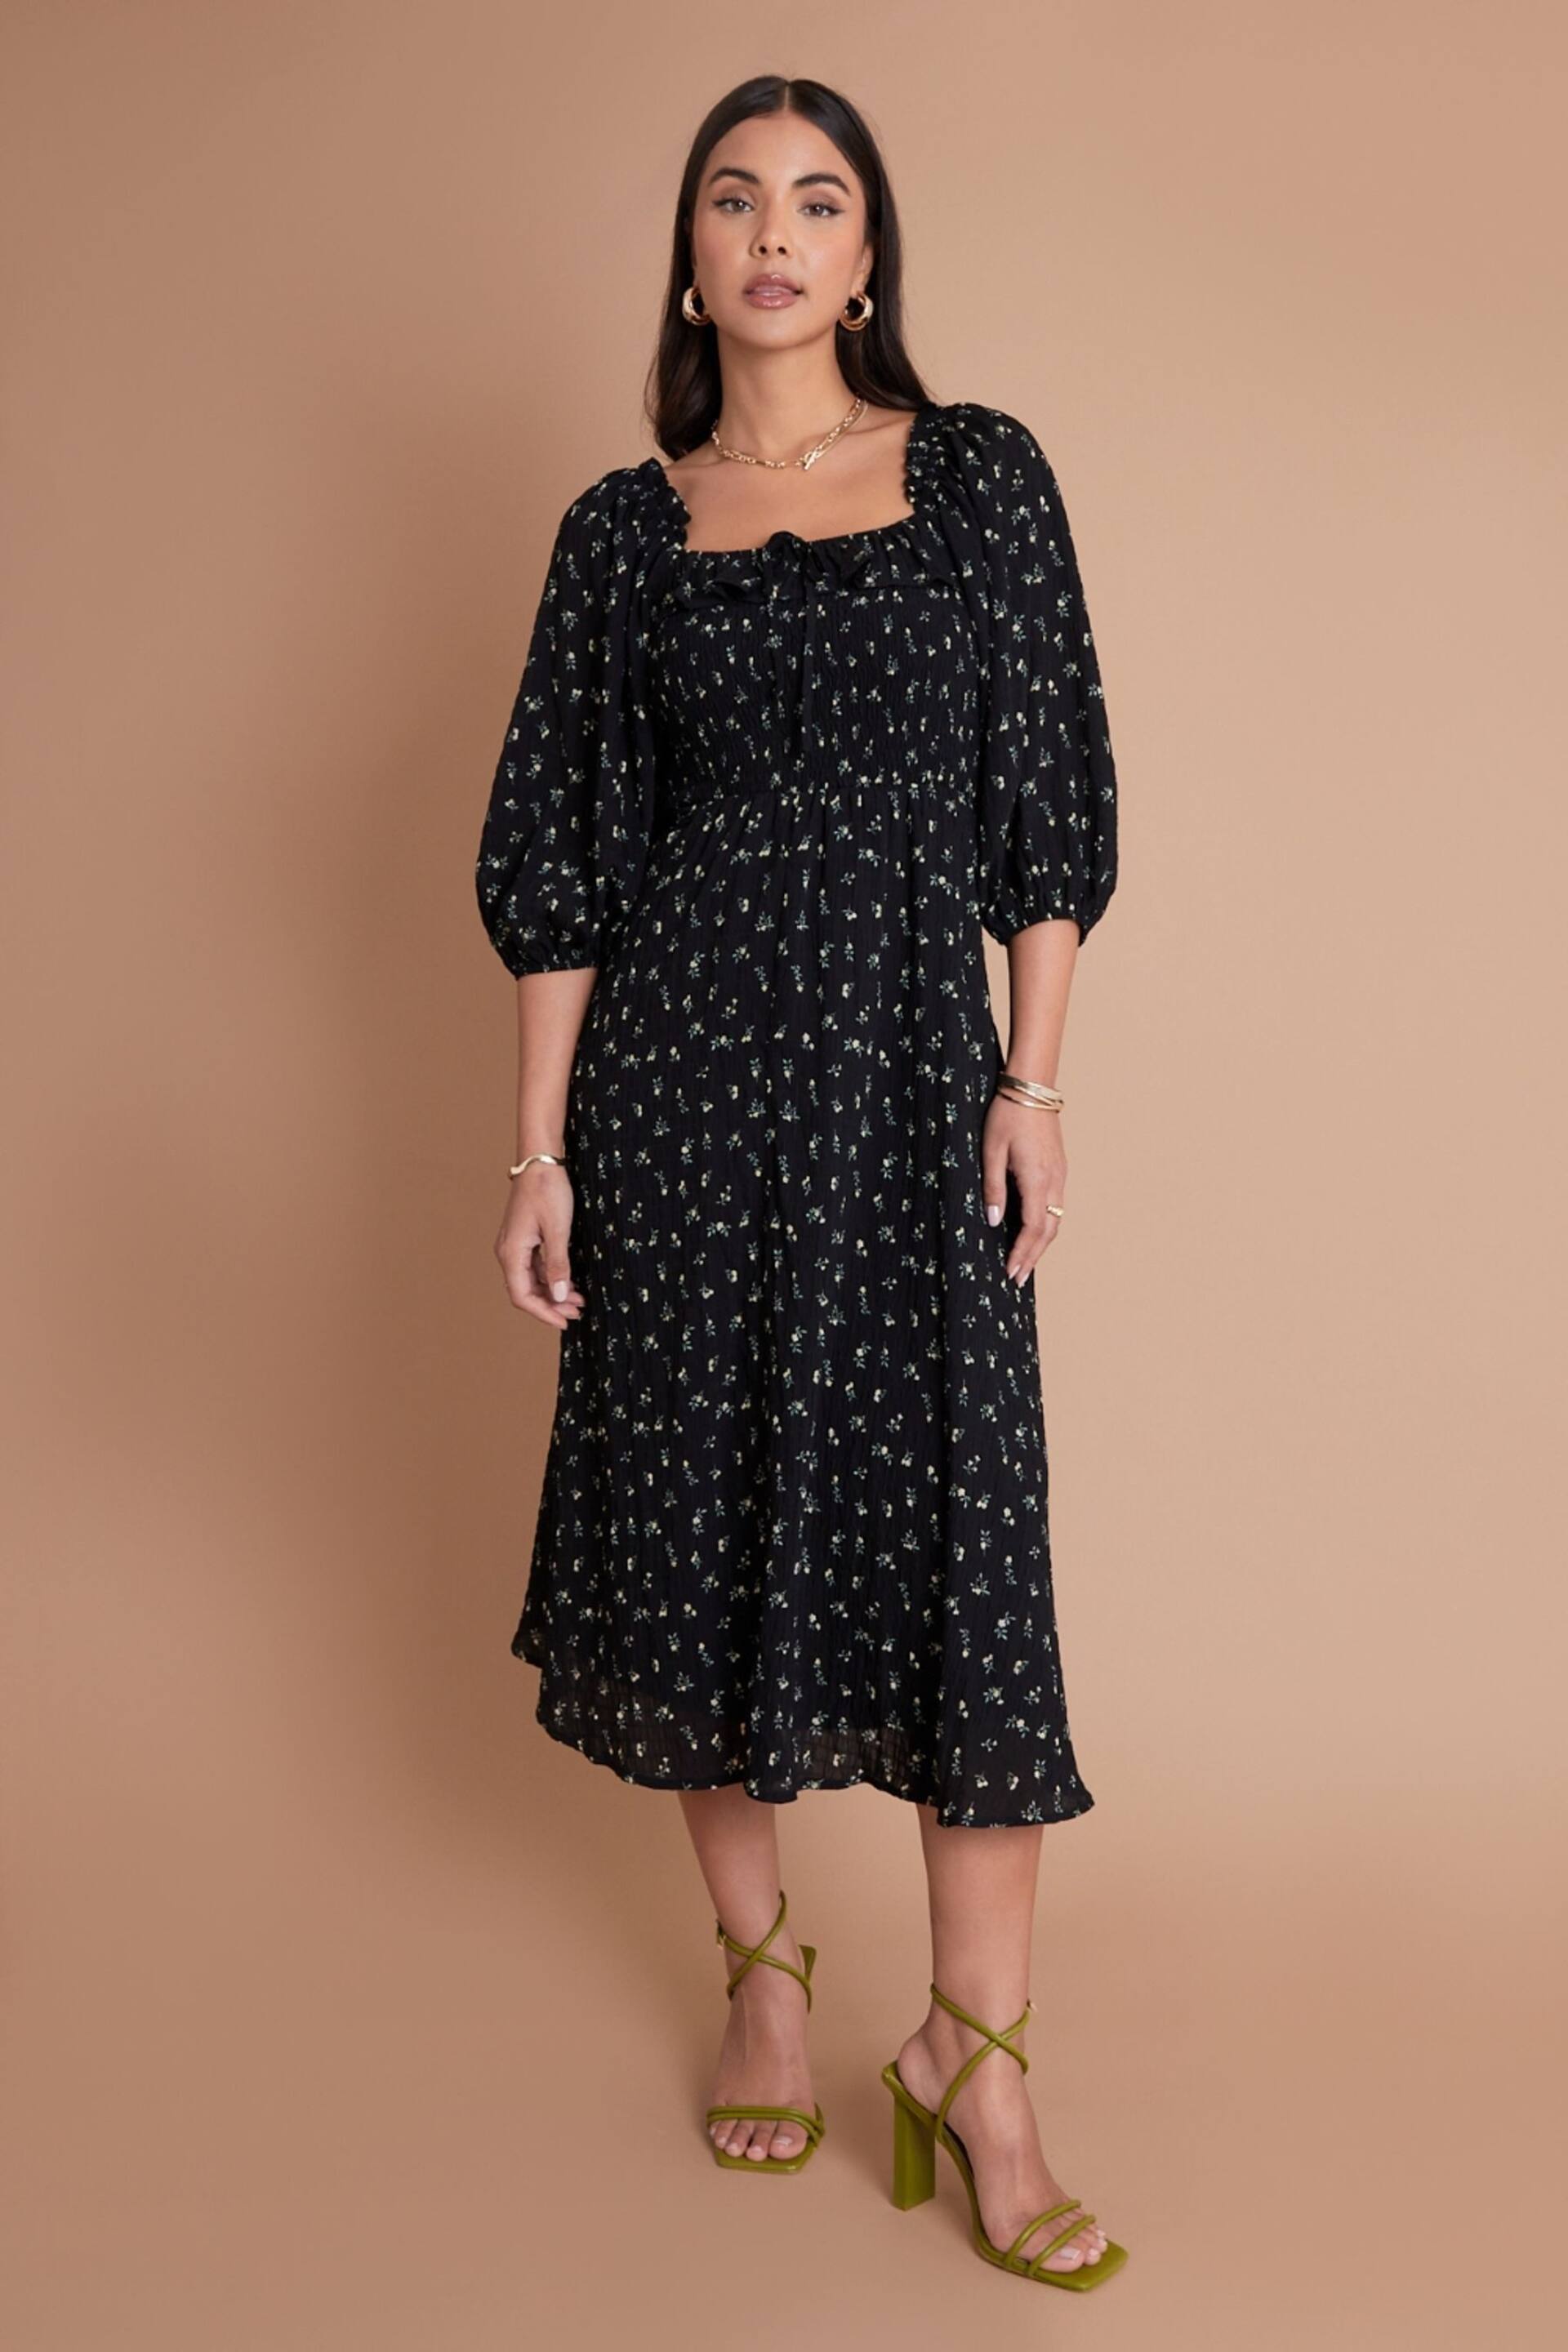 Another Sunday Shirred Bust 3/4 Sleeve Milkmaid Ditsy Print Black Dress - Image 2 of 6